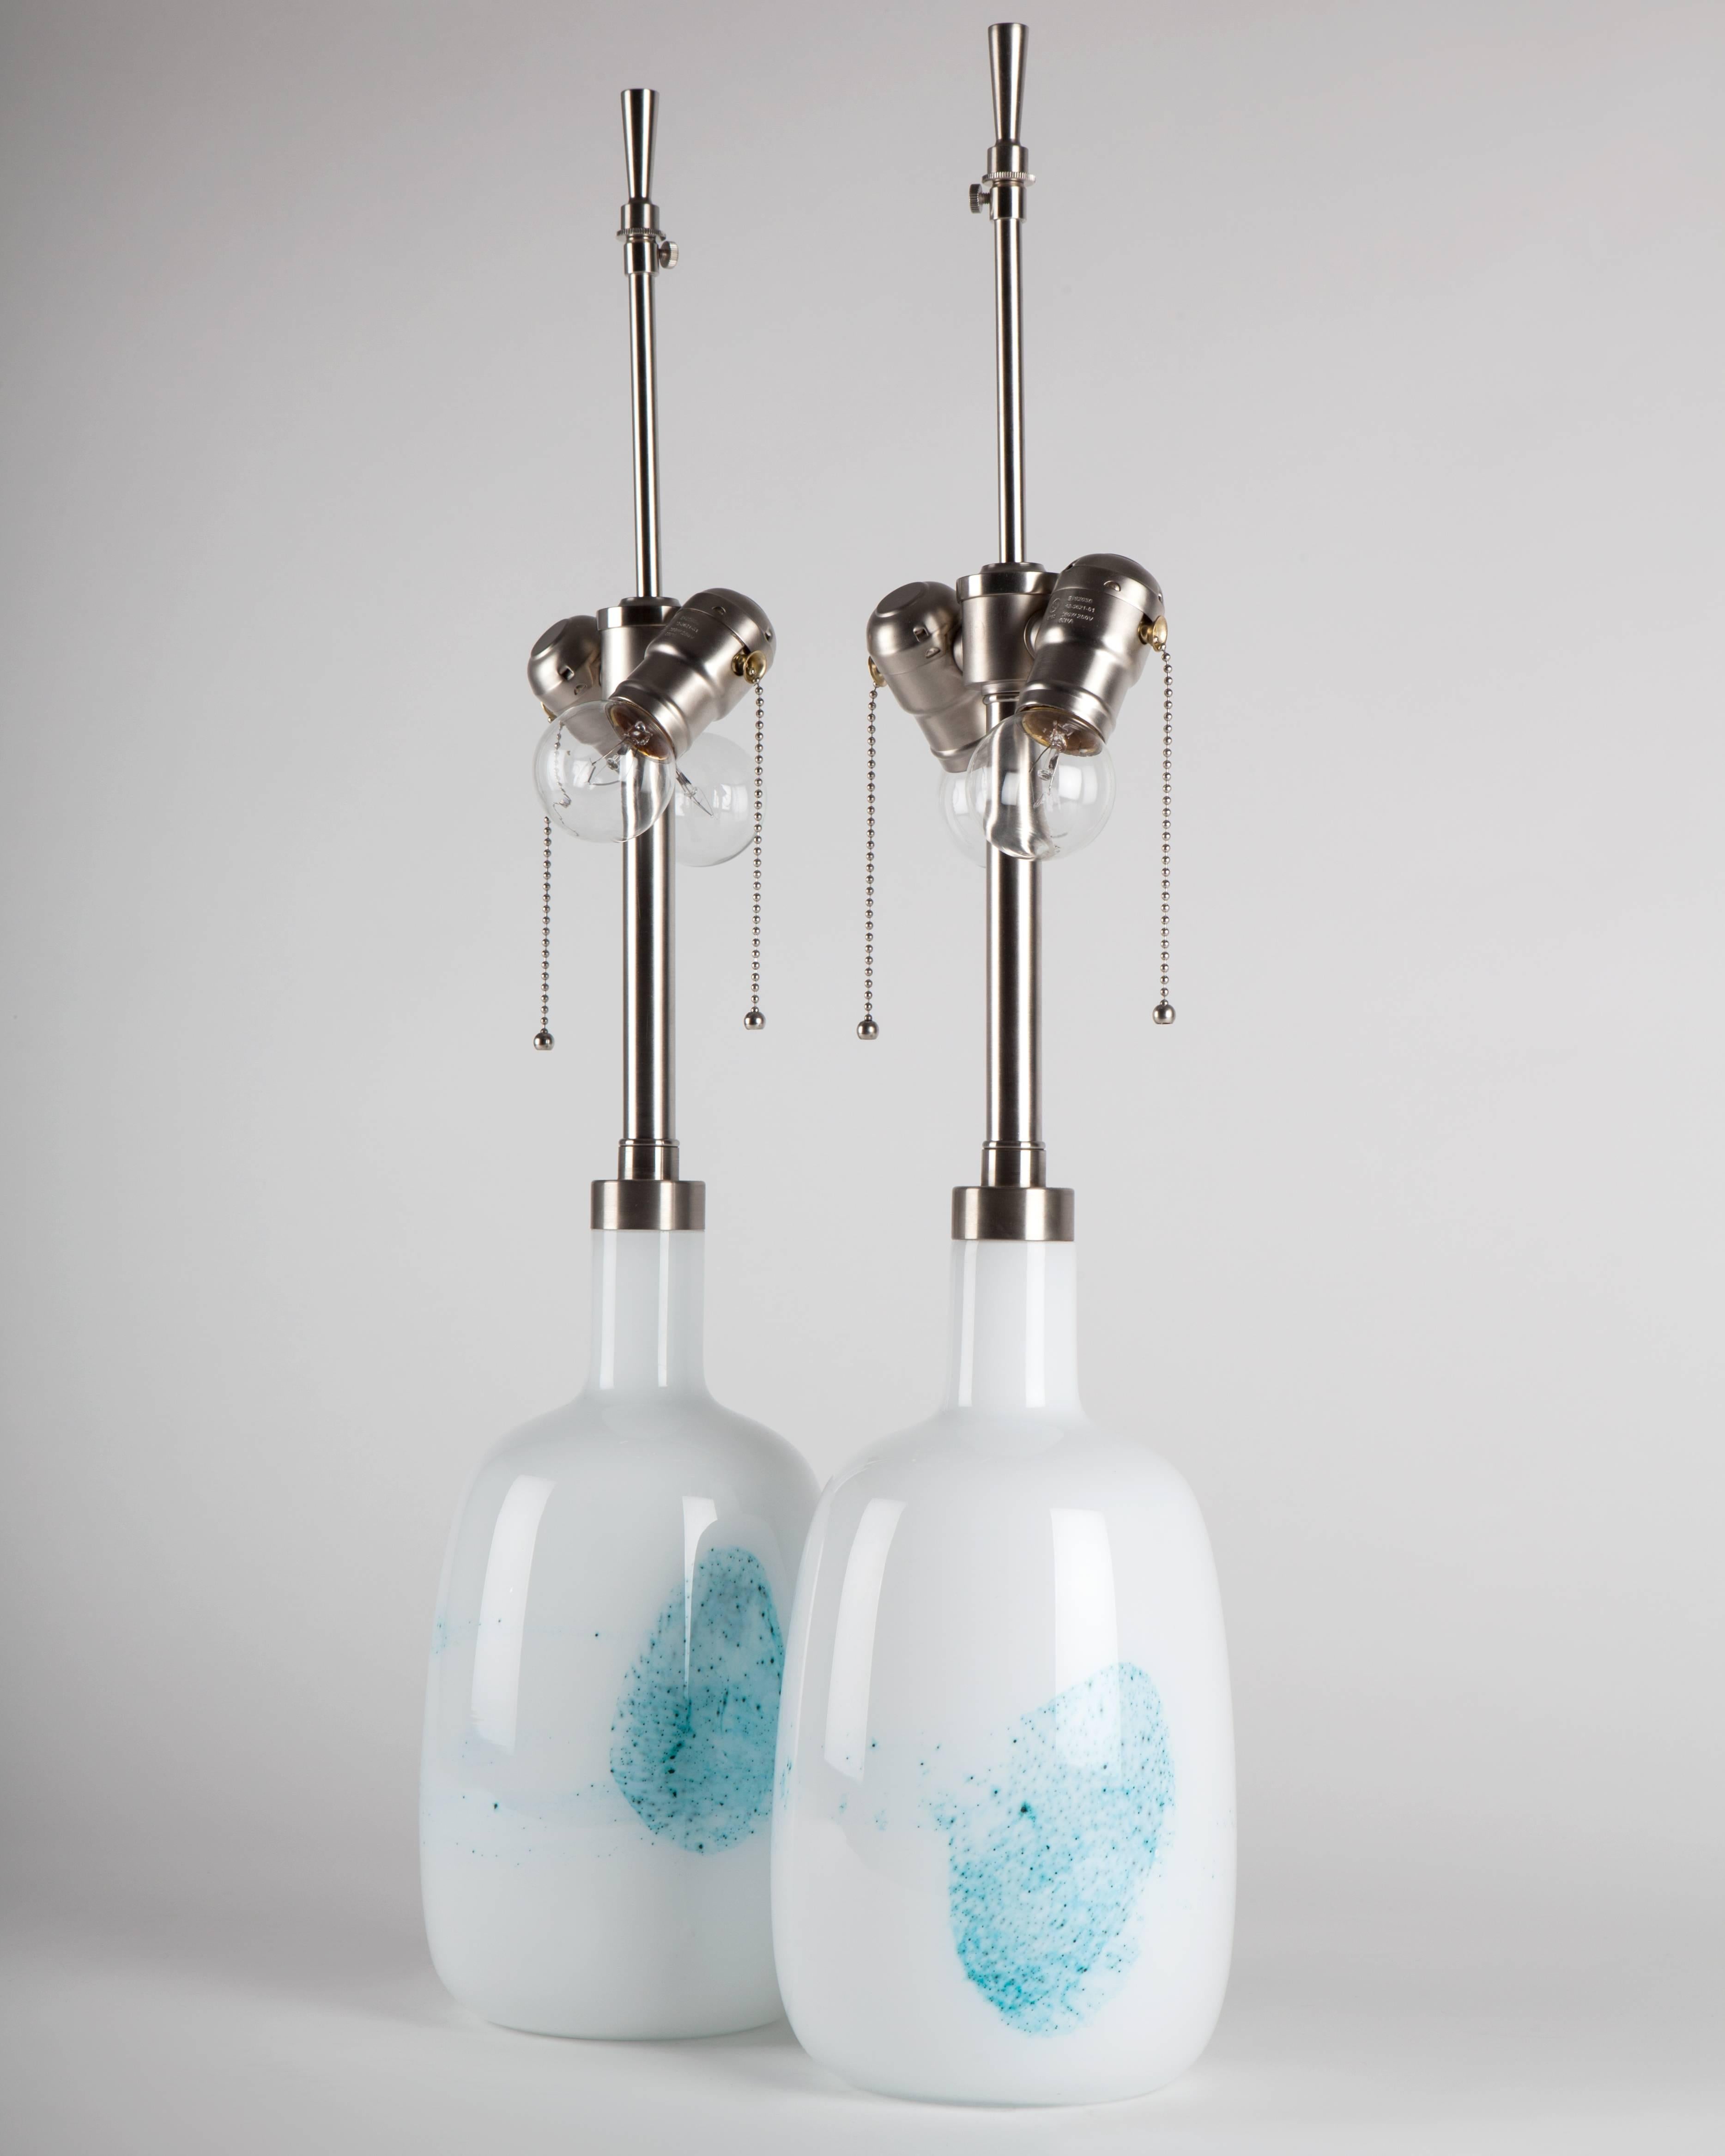 ATL1934,

a pair of vintage blue and white glass table lamps with brushed nickel fittings. Signed by the Danish maker Le Klint. Due to the antique nature of this fixture, there may be some nicks or imperfections in the glass as well as variations